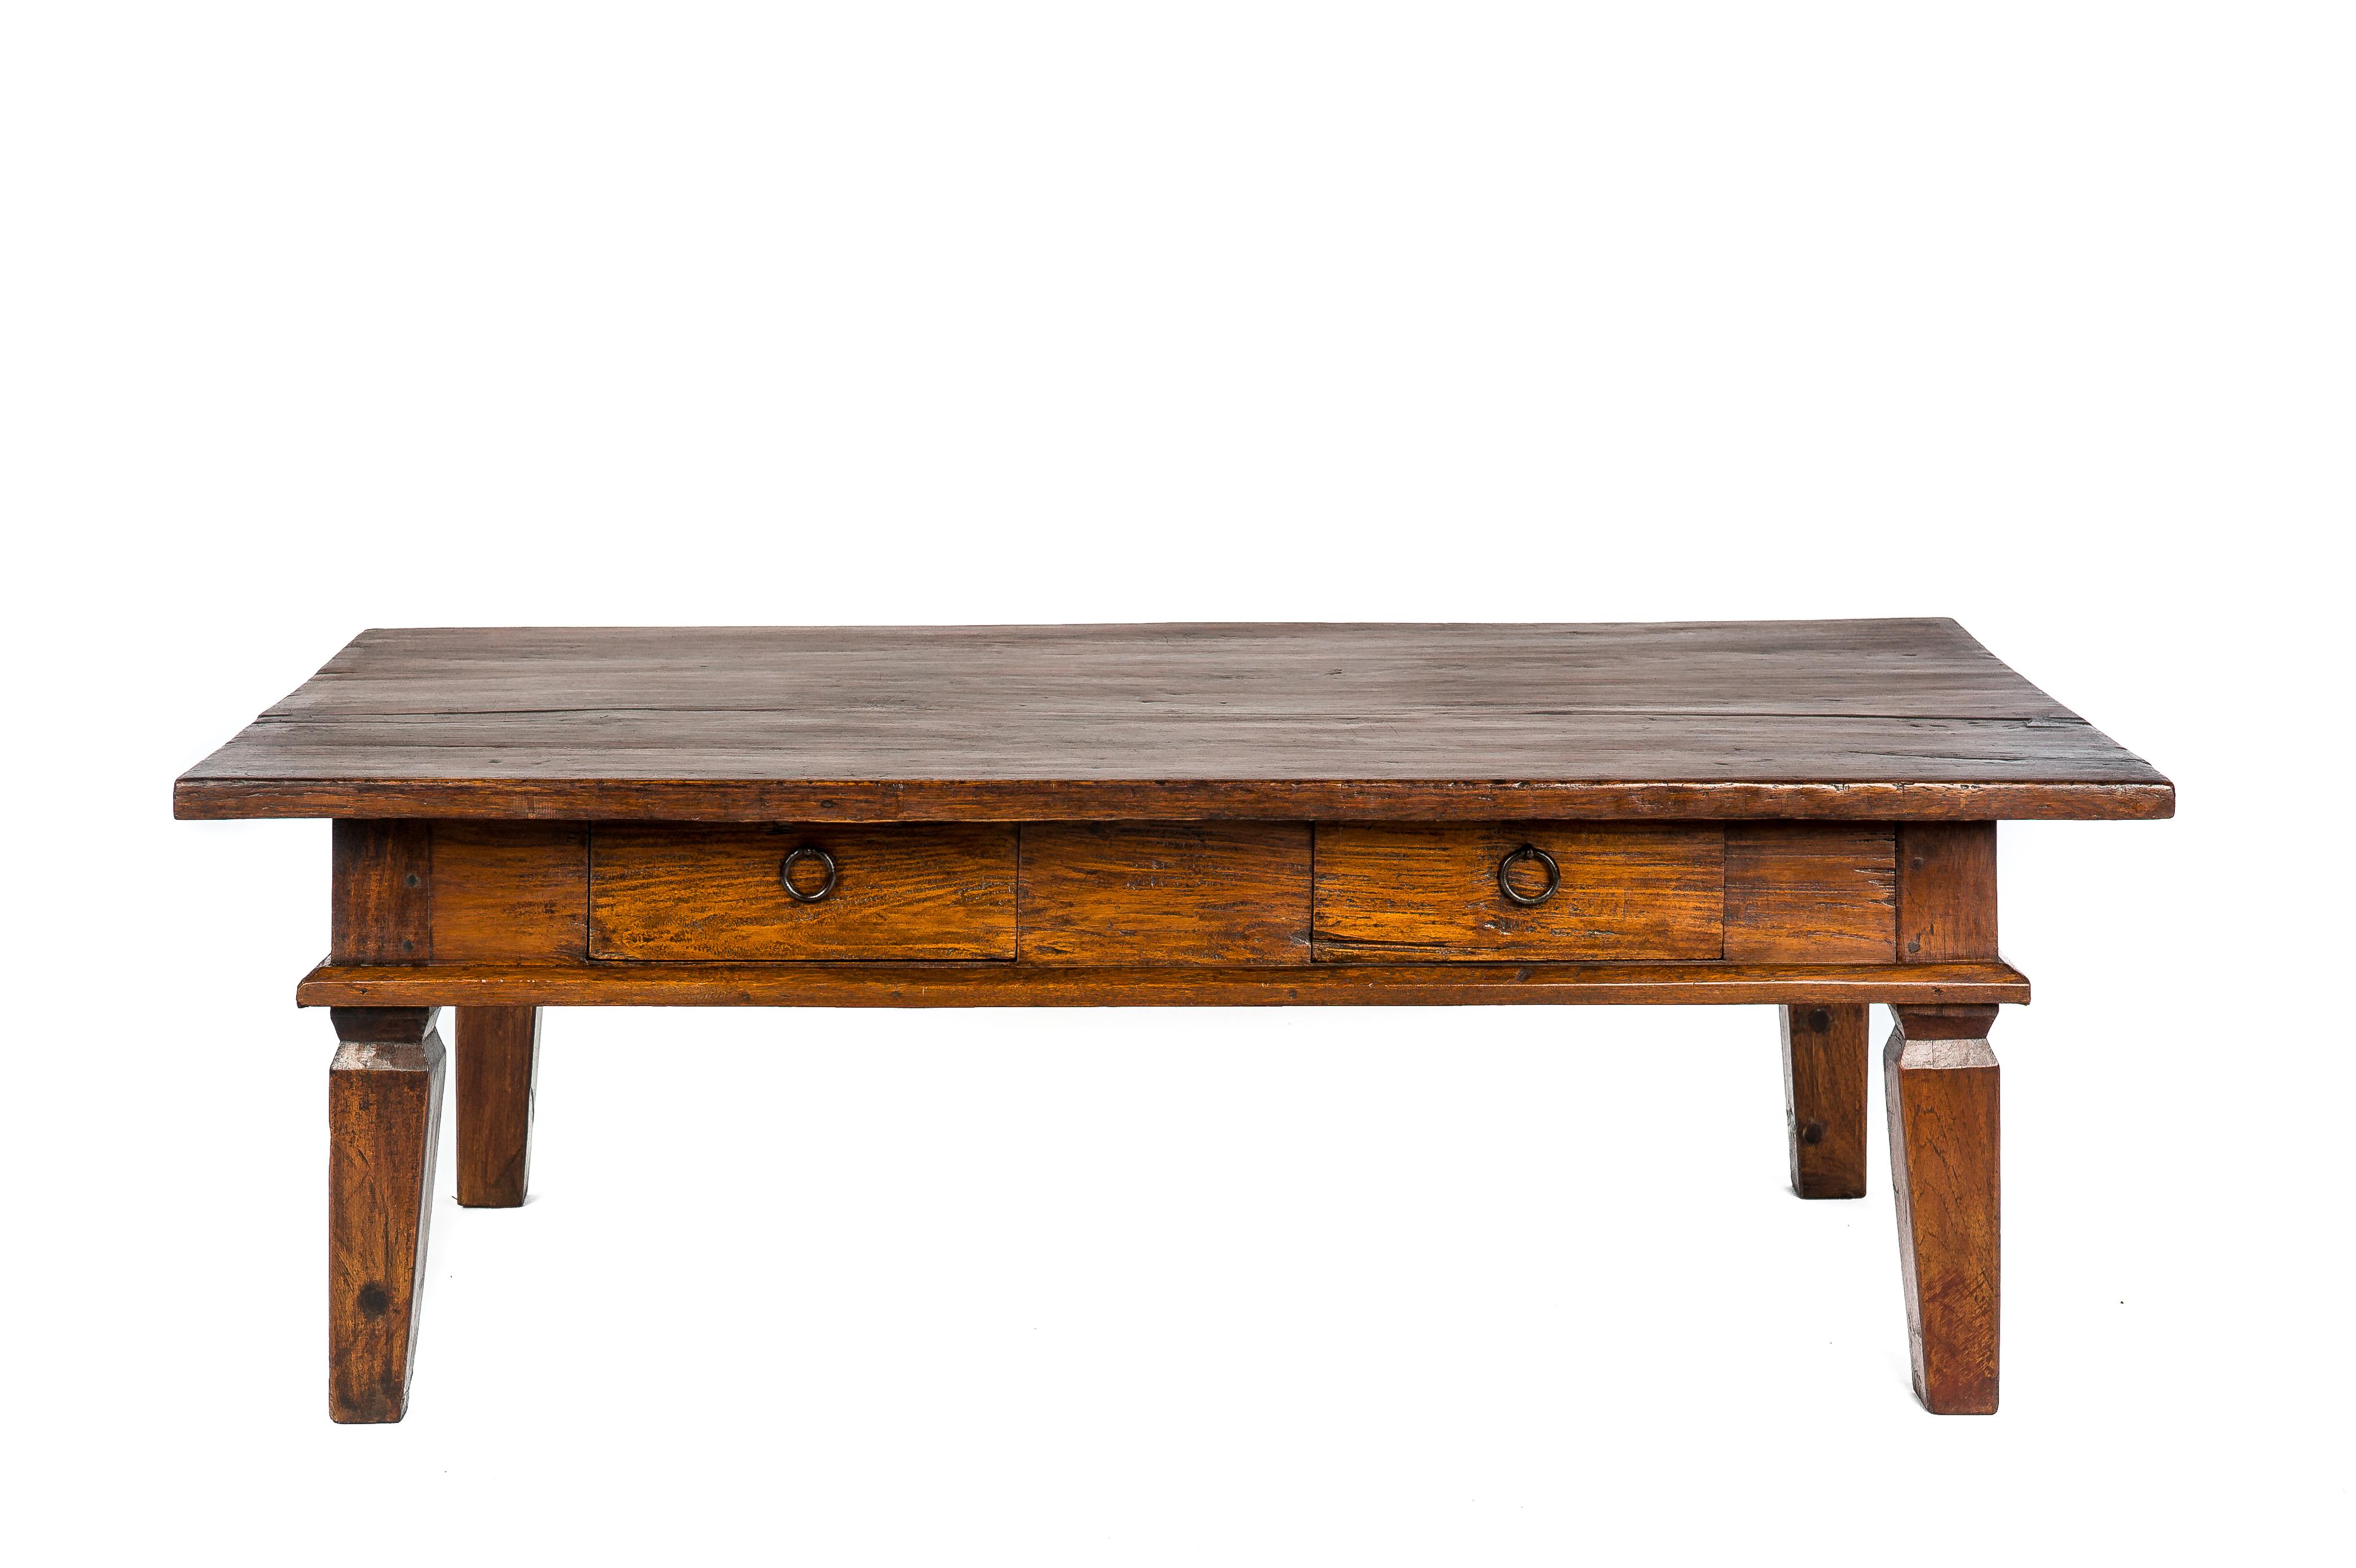 This robust coffee table was made in the Netherlands in the early 20th century. The table was completely made in solid Indonesian teak wood with a beautiful grain pattern. This unique top was made from a single board of teakwood. The table features